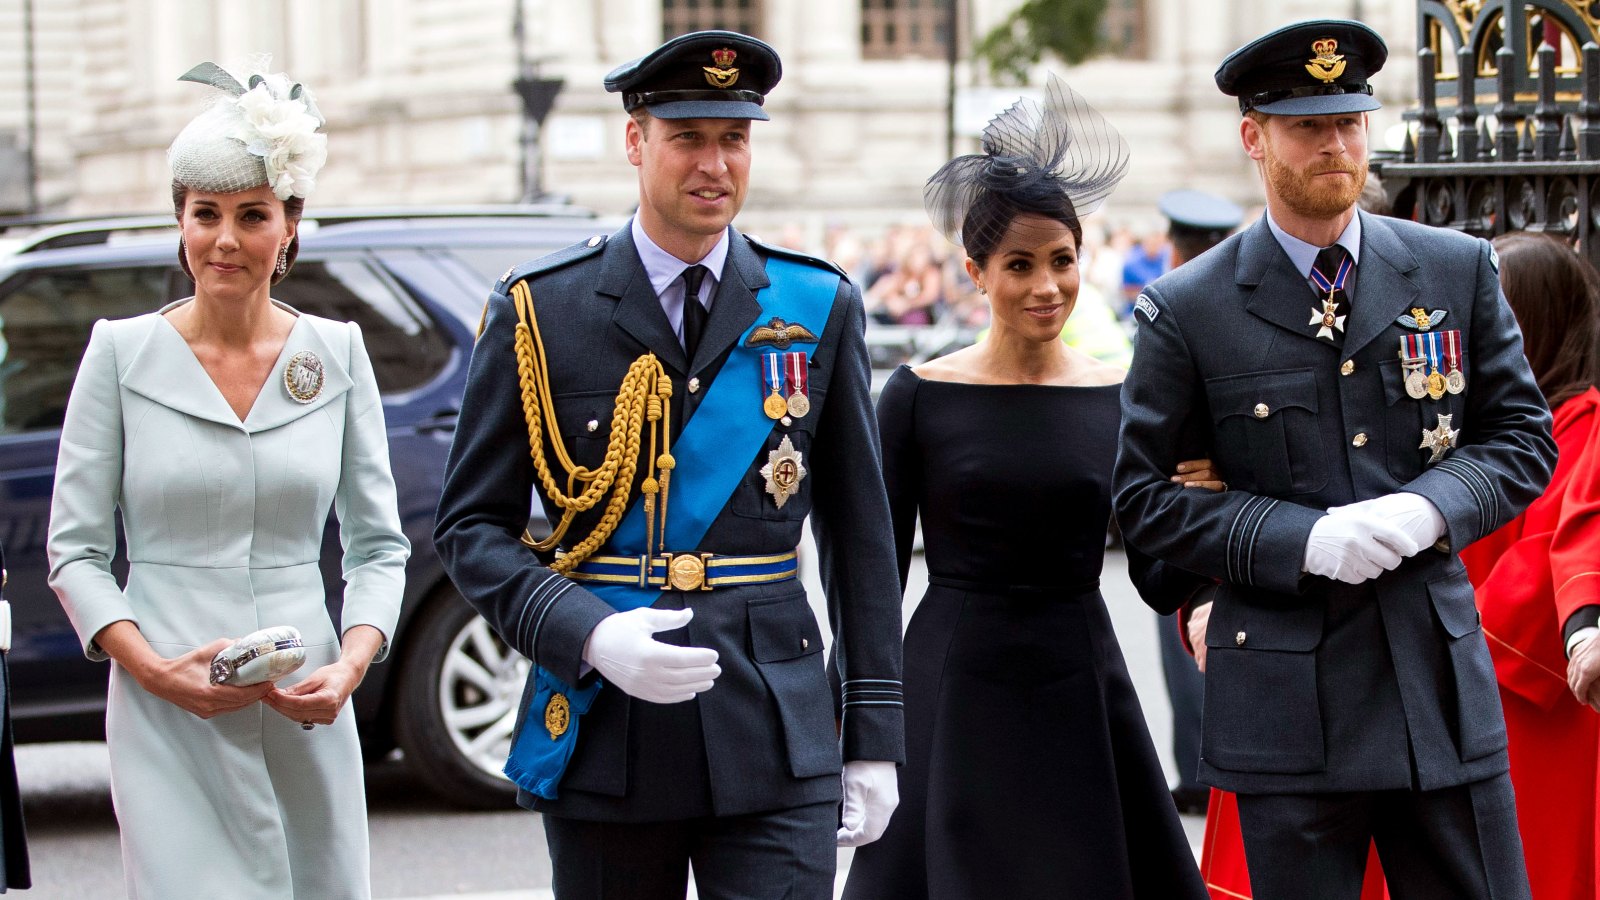 Prince William Is Angry With Harry, Duchess Kate Incredibly Hurt by Royal Step Down